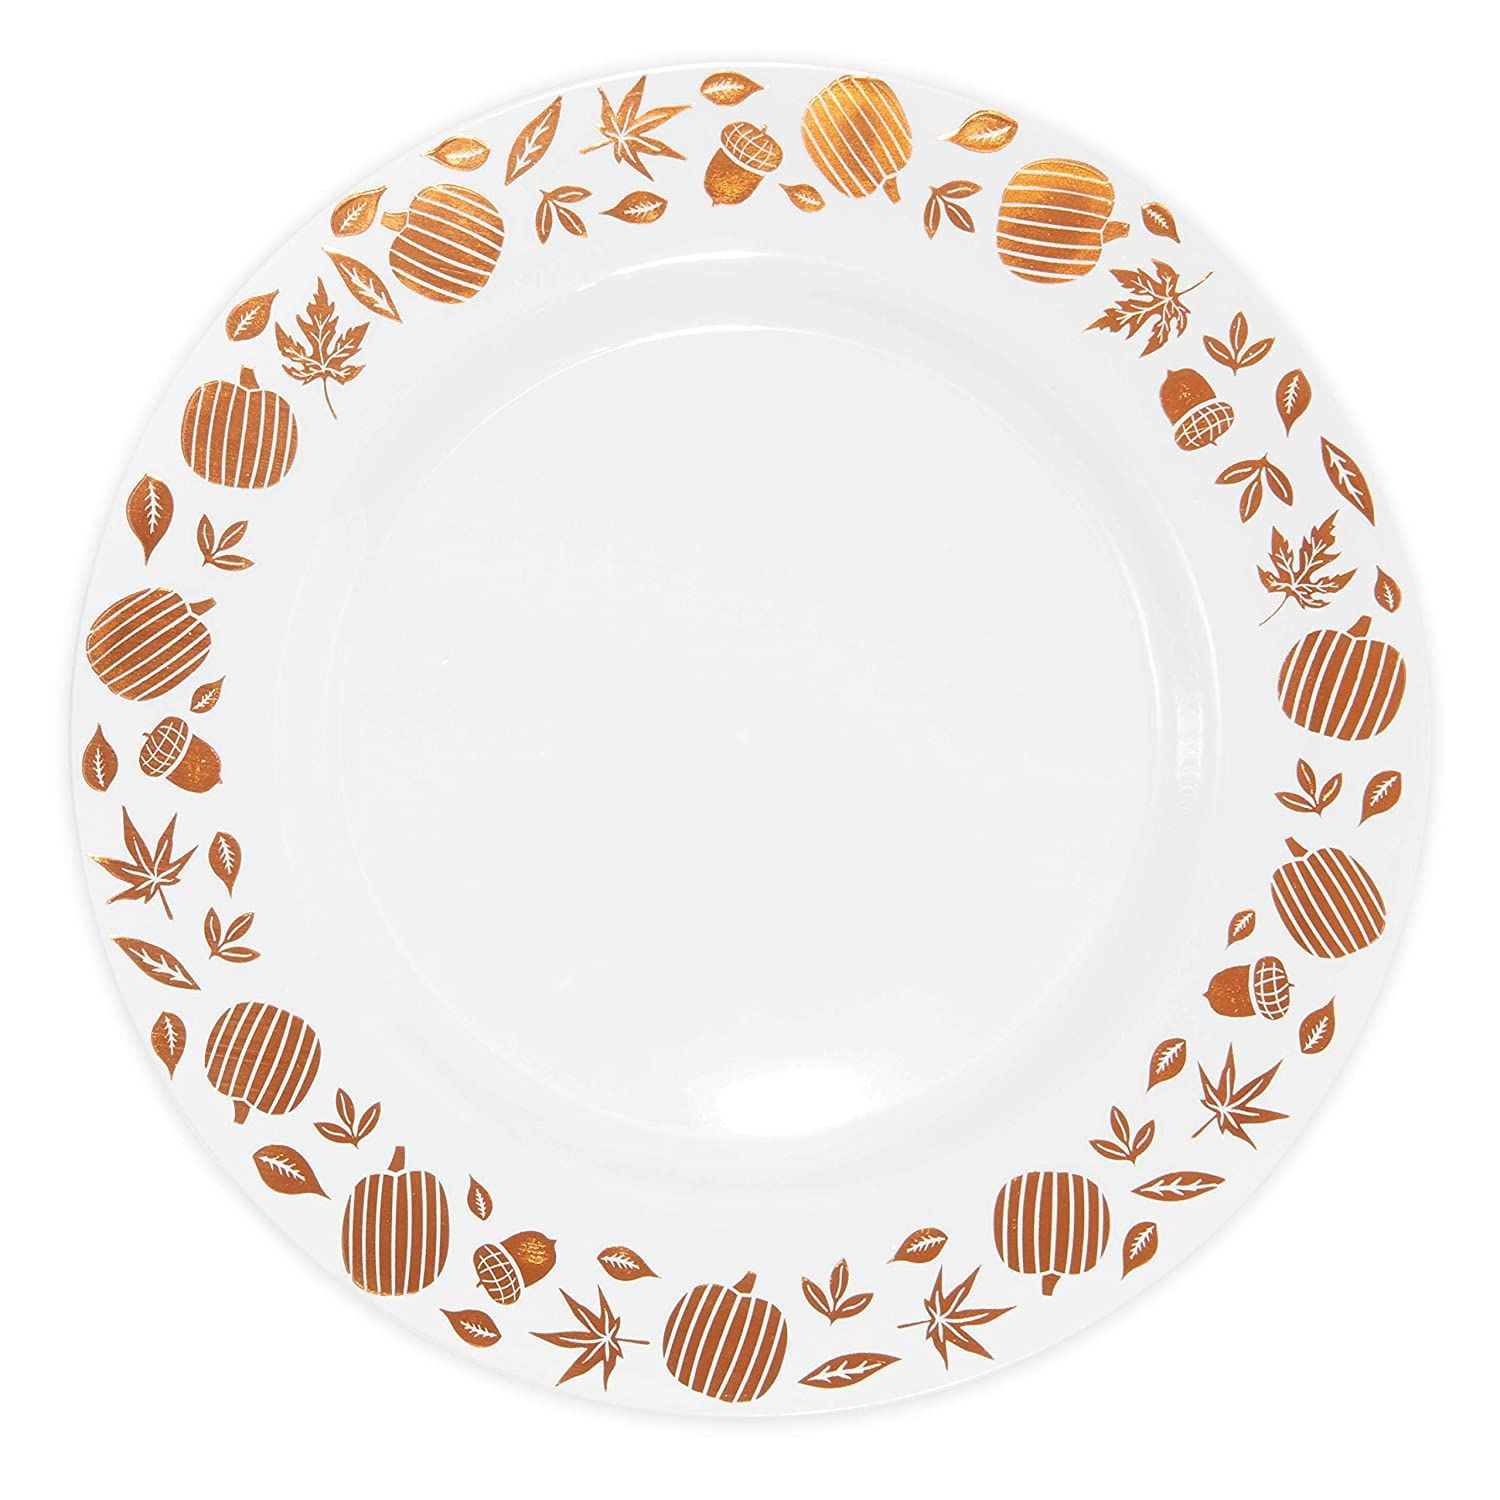 Autumn Leaves Themed Party Set - 36 16 Dinner Napkins Oversize Dinner Plates and